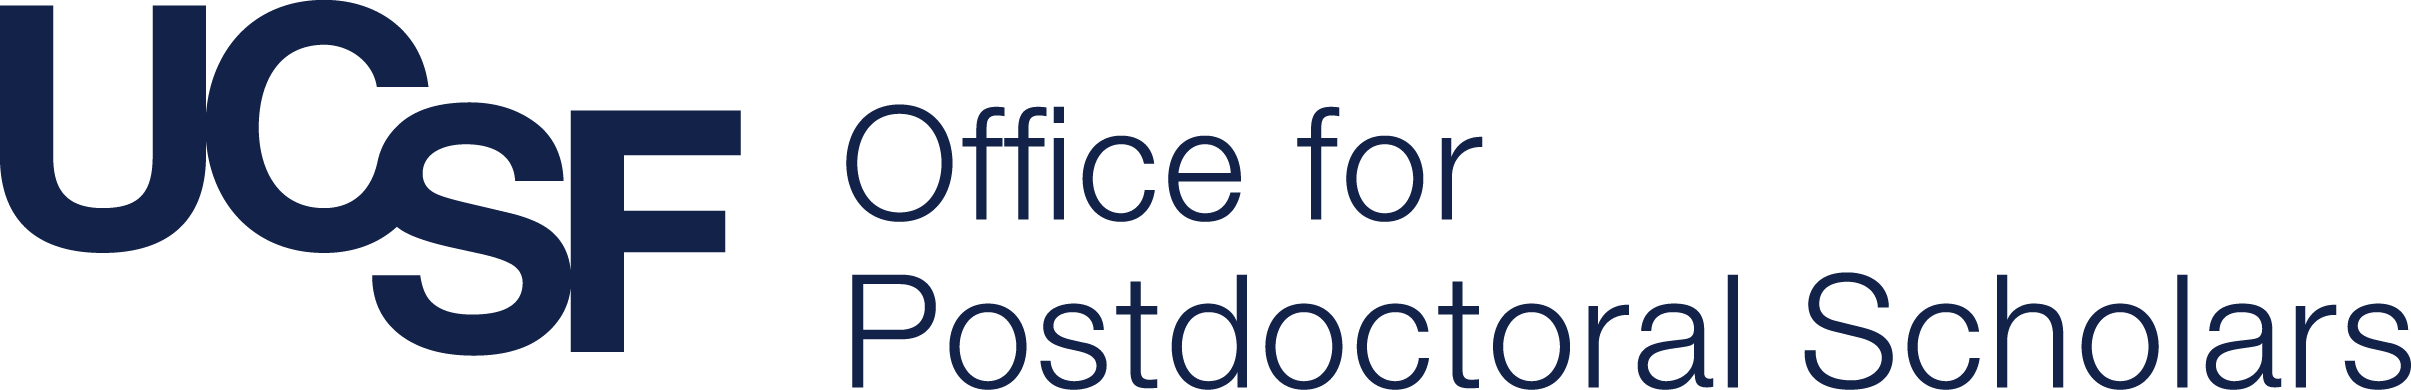 Taxes | Office For Postdoctoral Scholars intended for Ucsf Former Employee W2